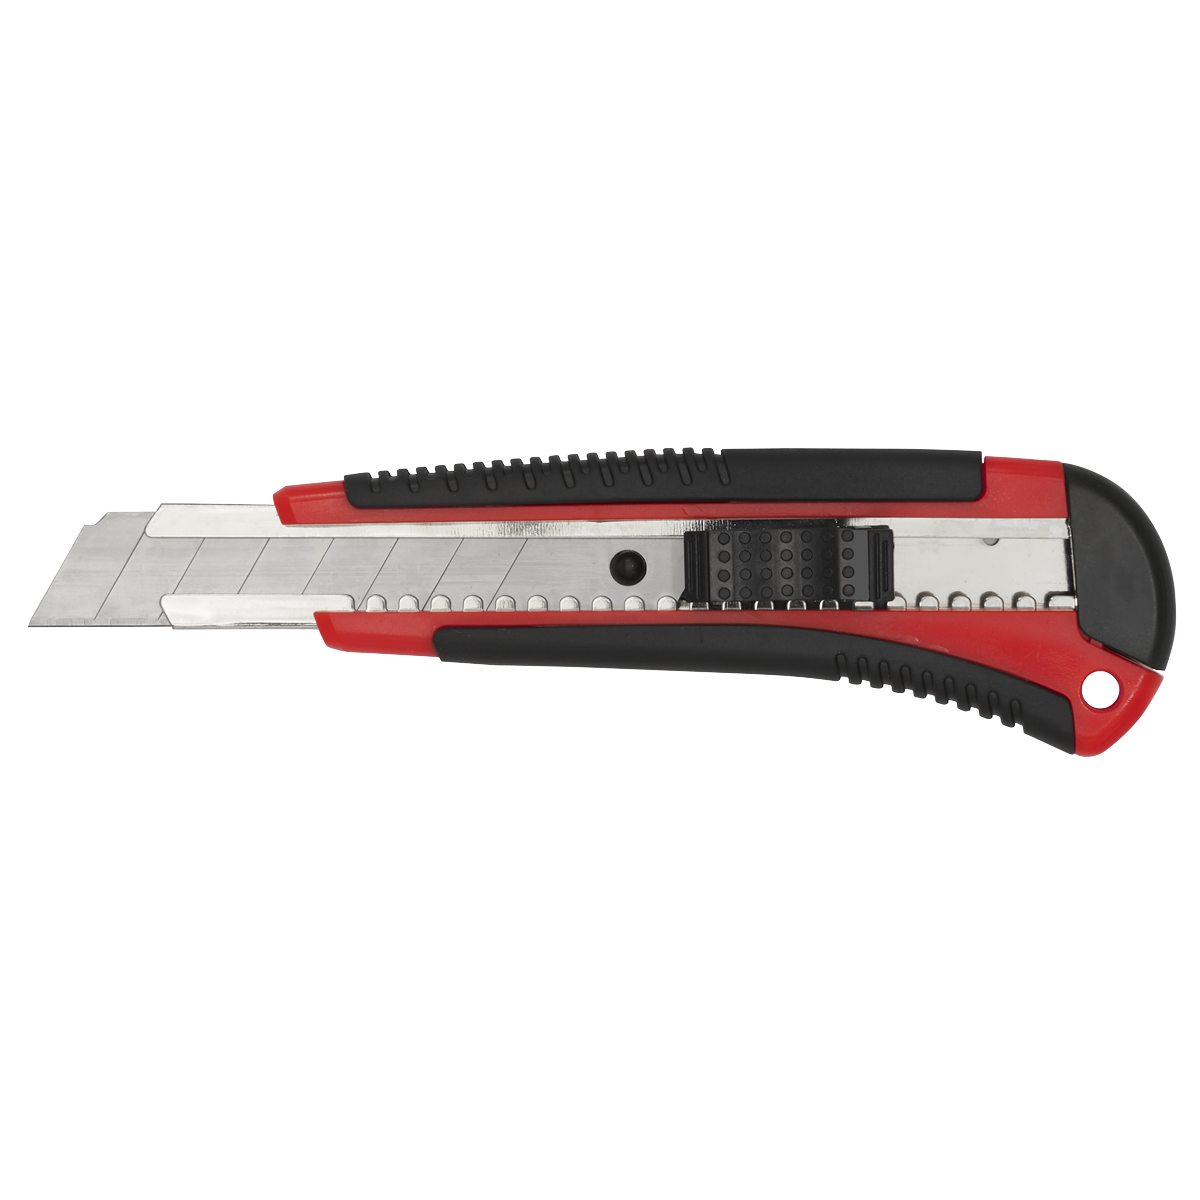 Sealey Retractable Snap-Off Knife AK86R